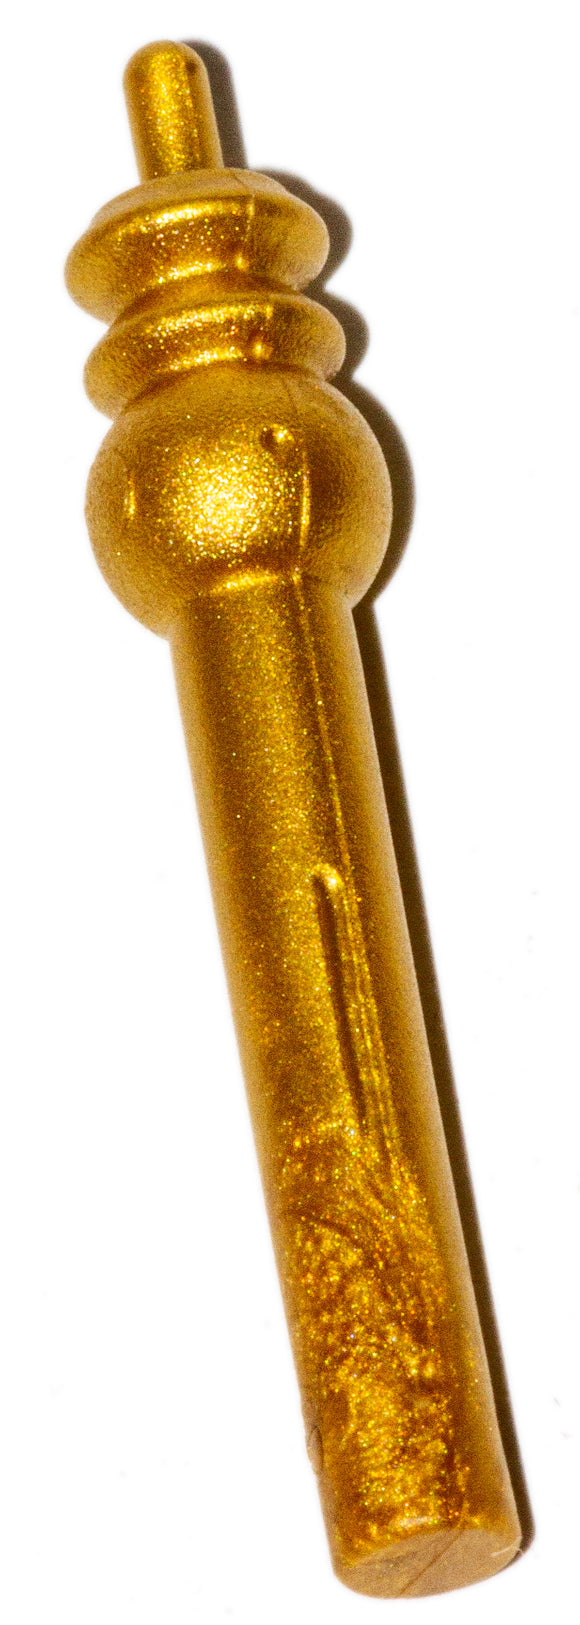 Playmobil 30 25 7263 Golden Gold Sceptre for princess round knobs near top 30 02 6042